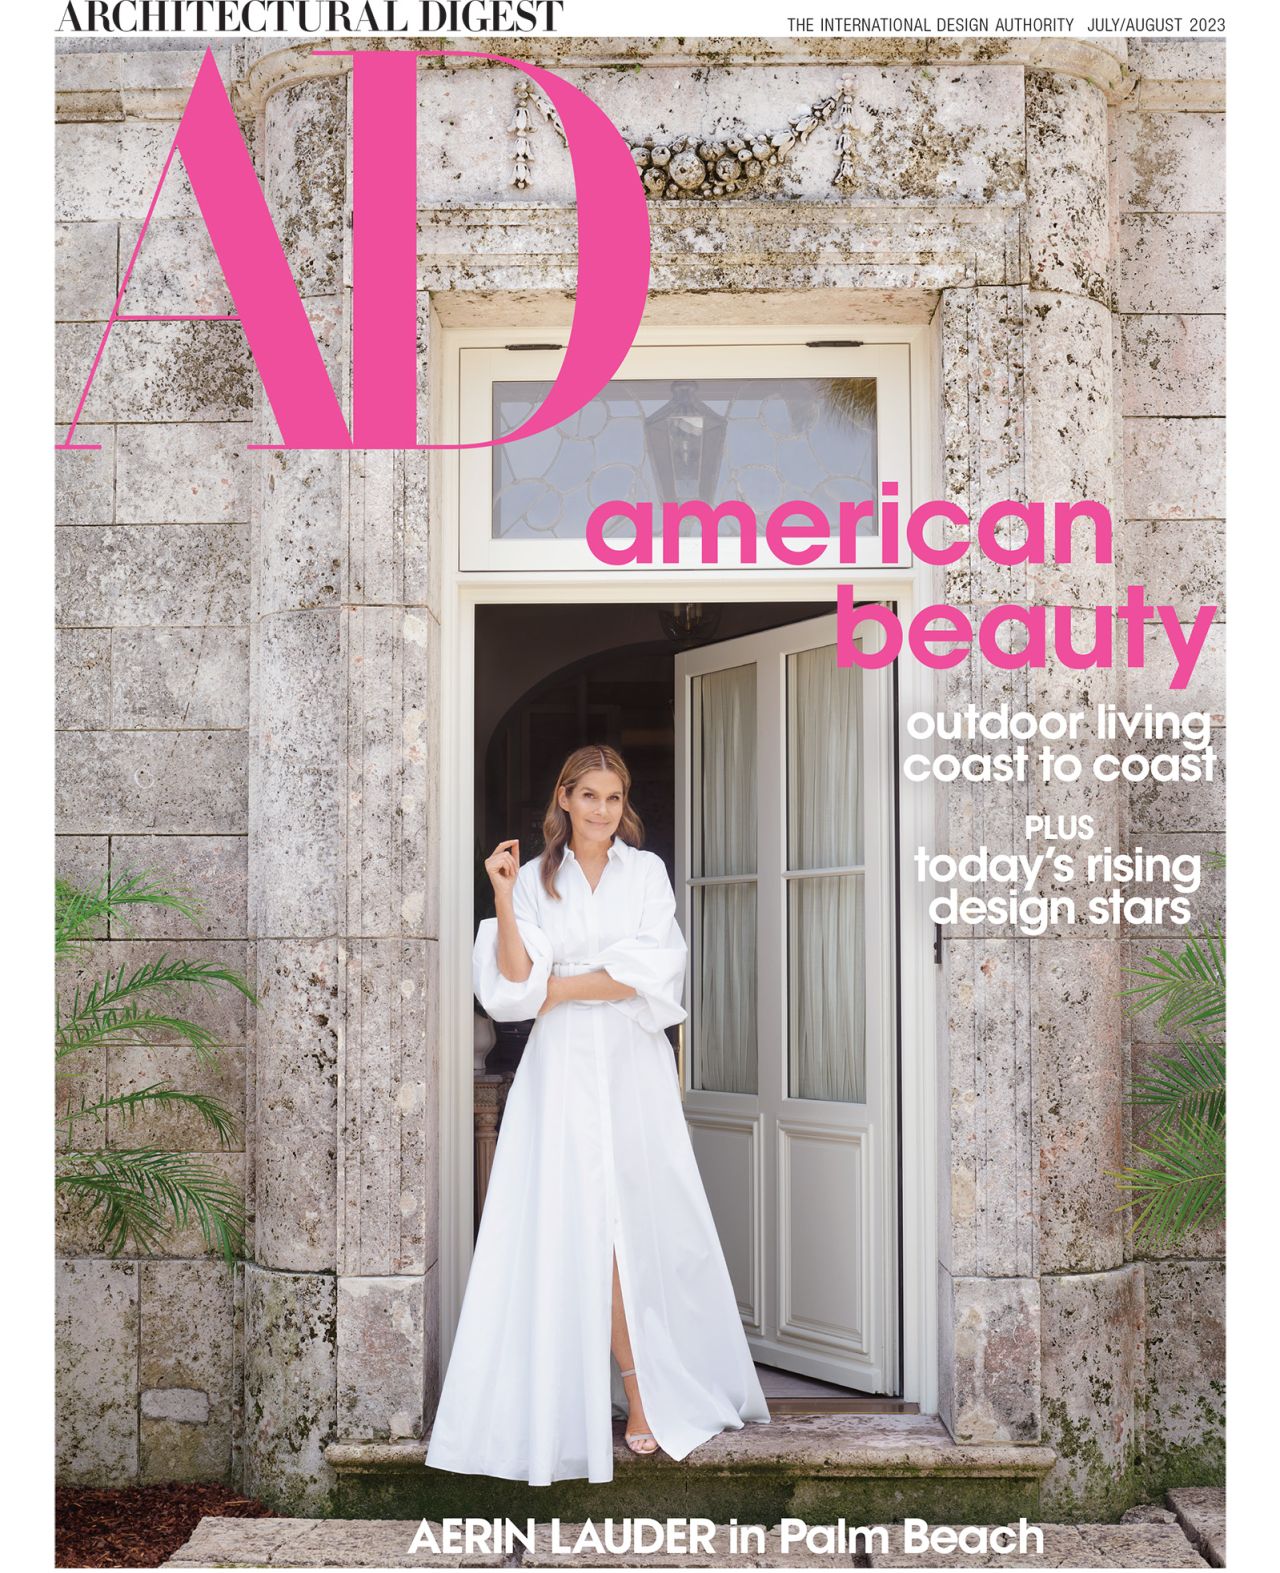 Lauder is featured in AD's cover story for July/August.